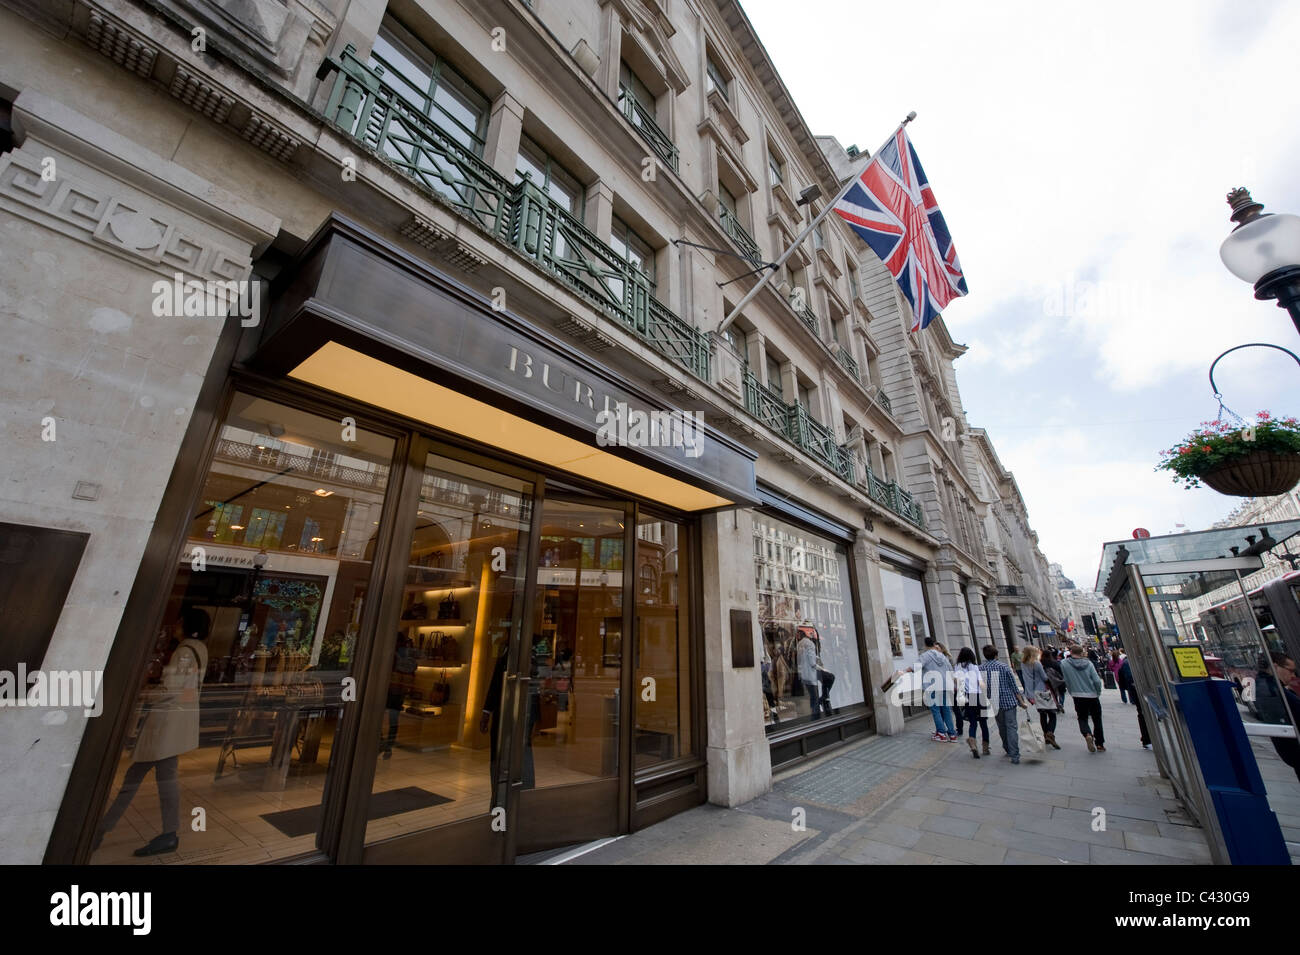 The storefront of the fashion brand Burberry on Regent Street, London. (Editorial use only). Stock Photo